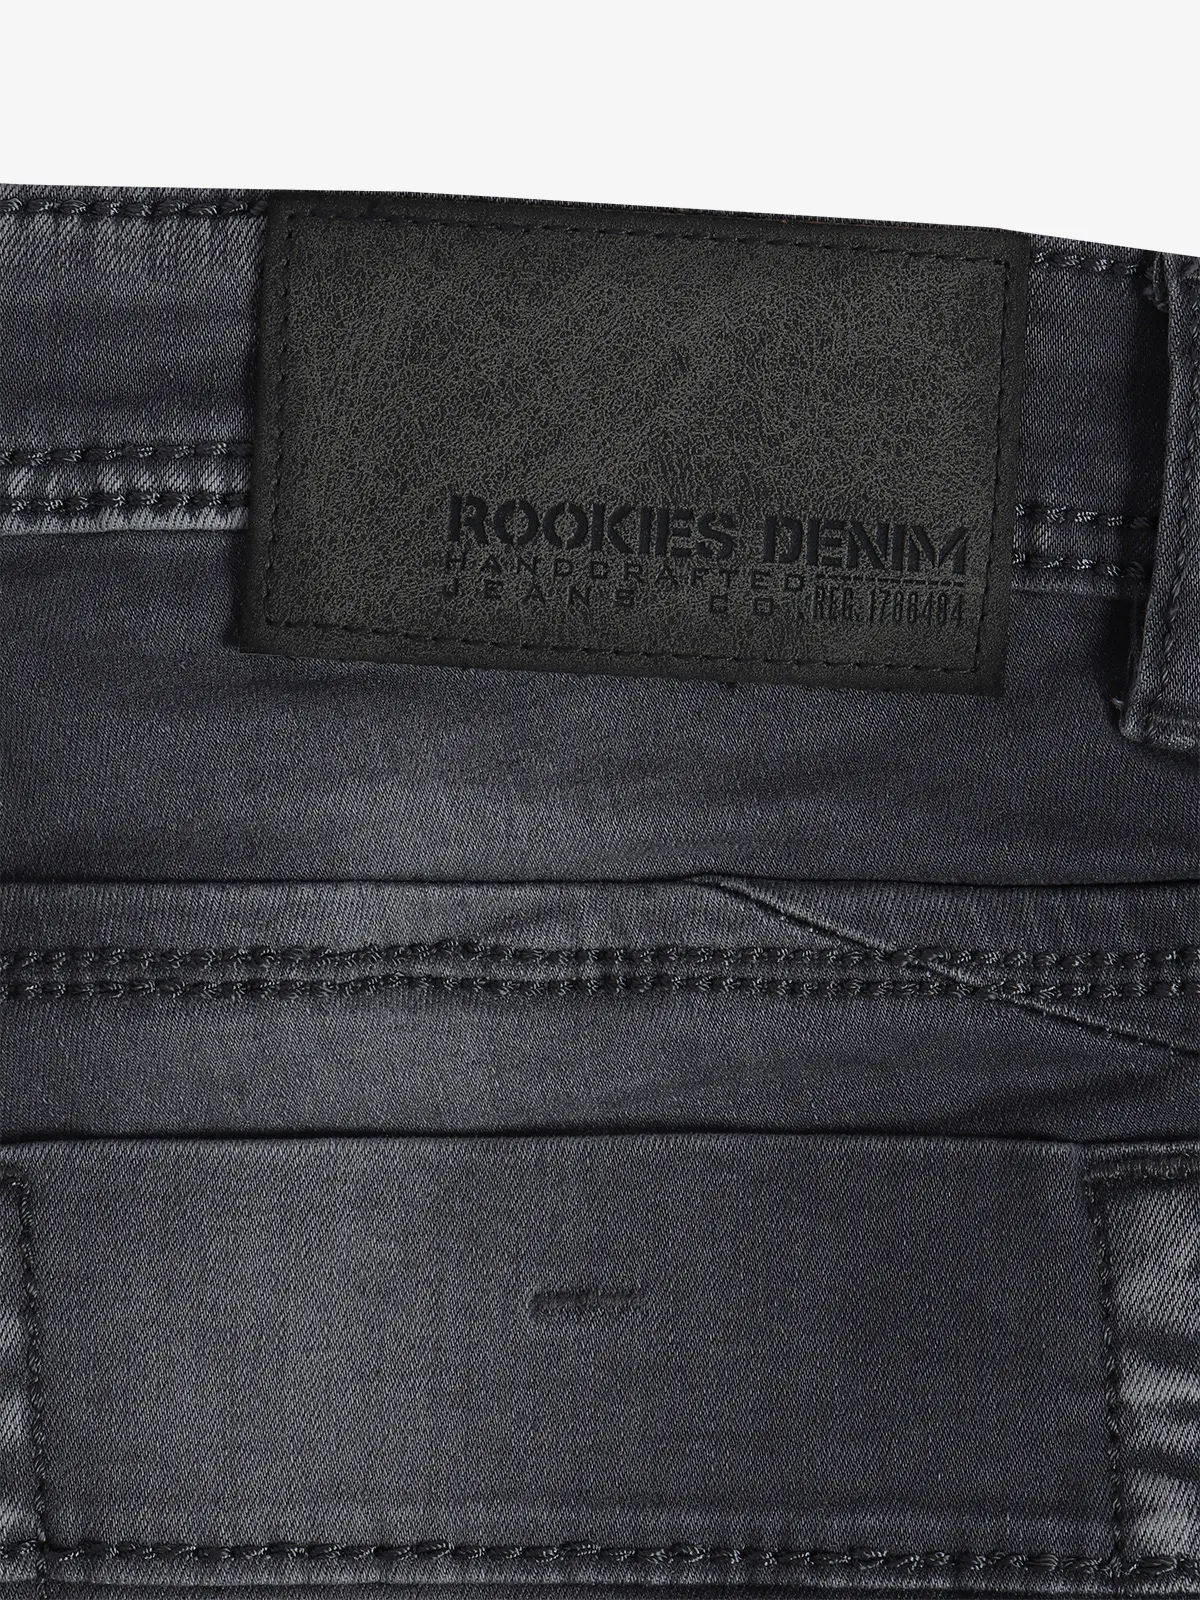 ROOKIES grey washed jeans